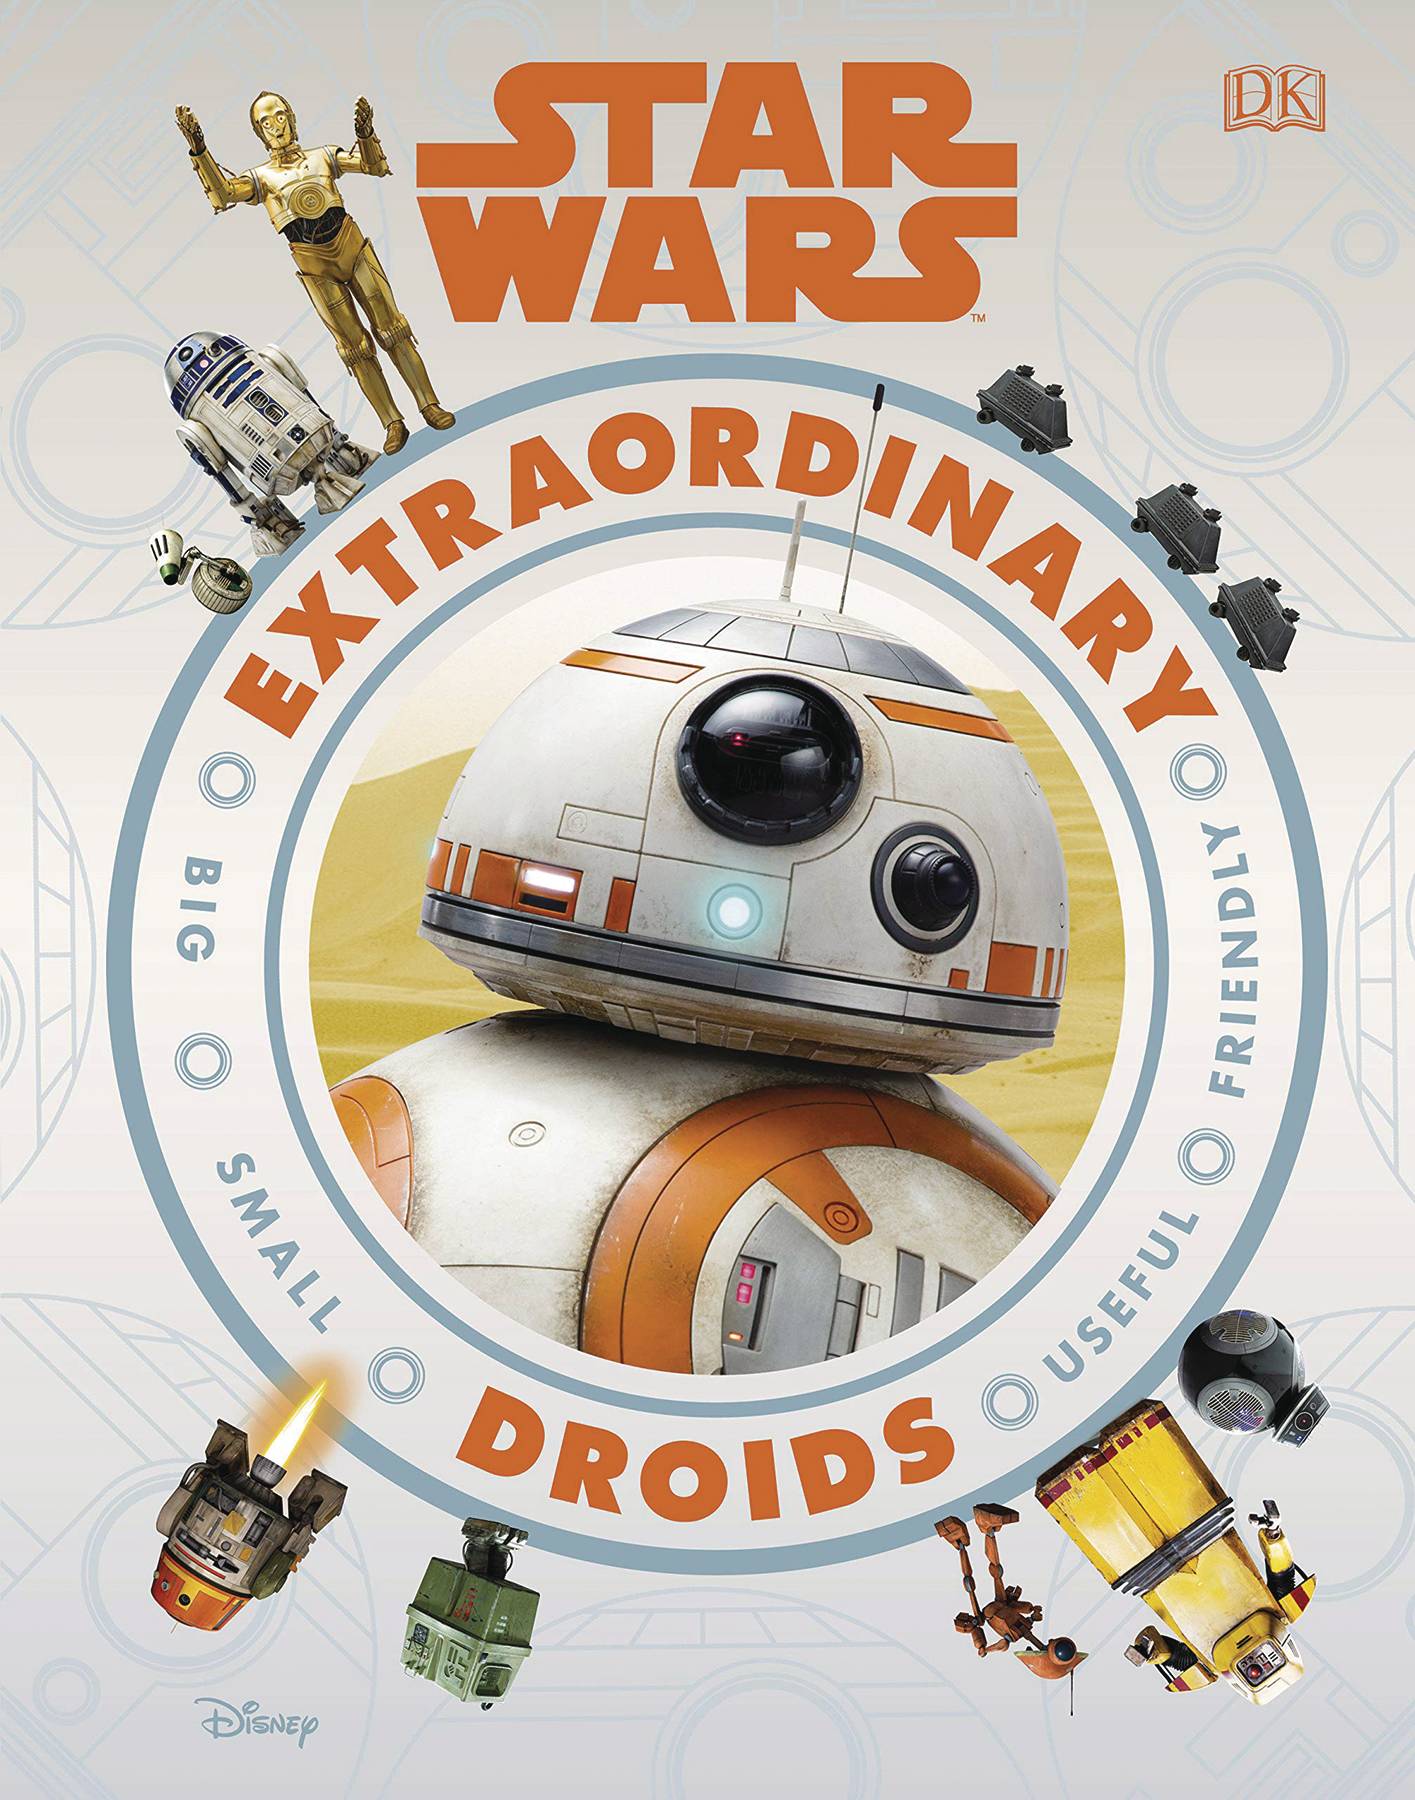 Star Wars Extraordinary Droids Hardcover